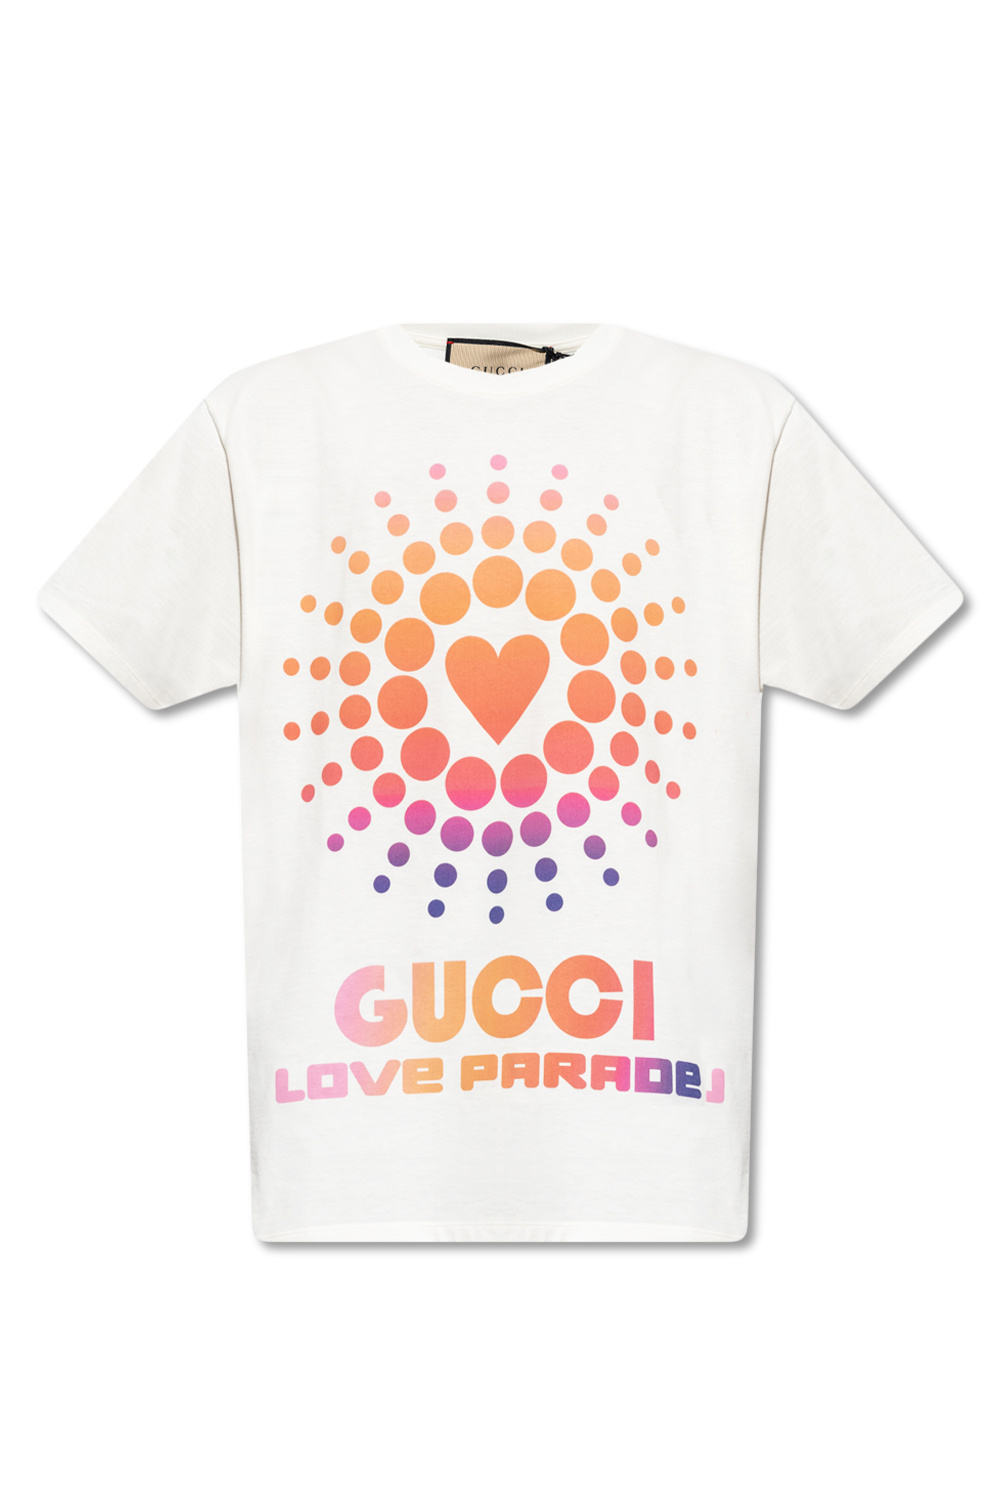 IetpShops Germany - shirt with 'Gucci Love Parade' print Gucci - White T -  gucci tortoiseshell crystal hair comb